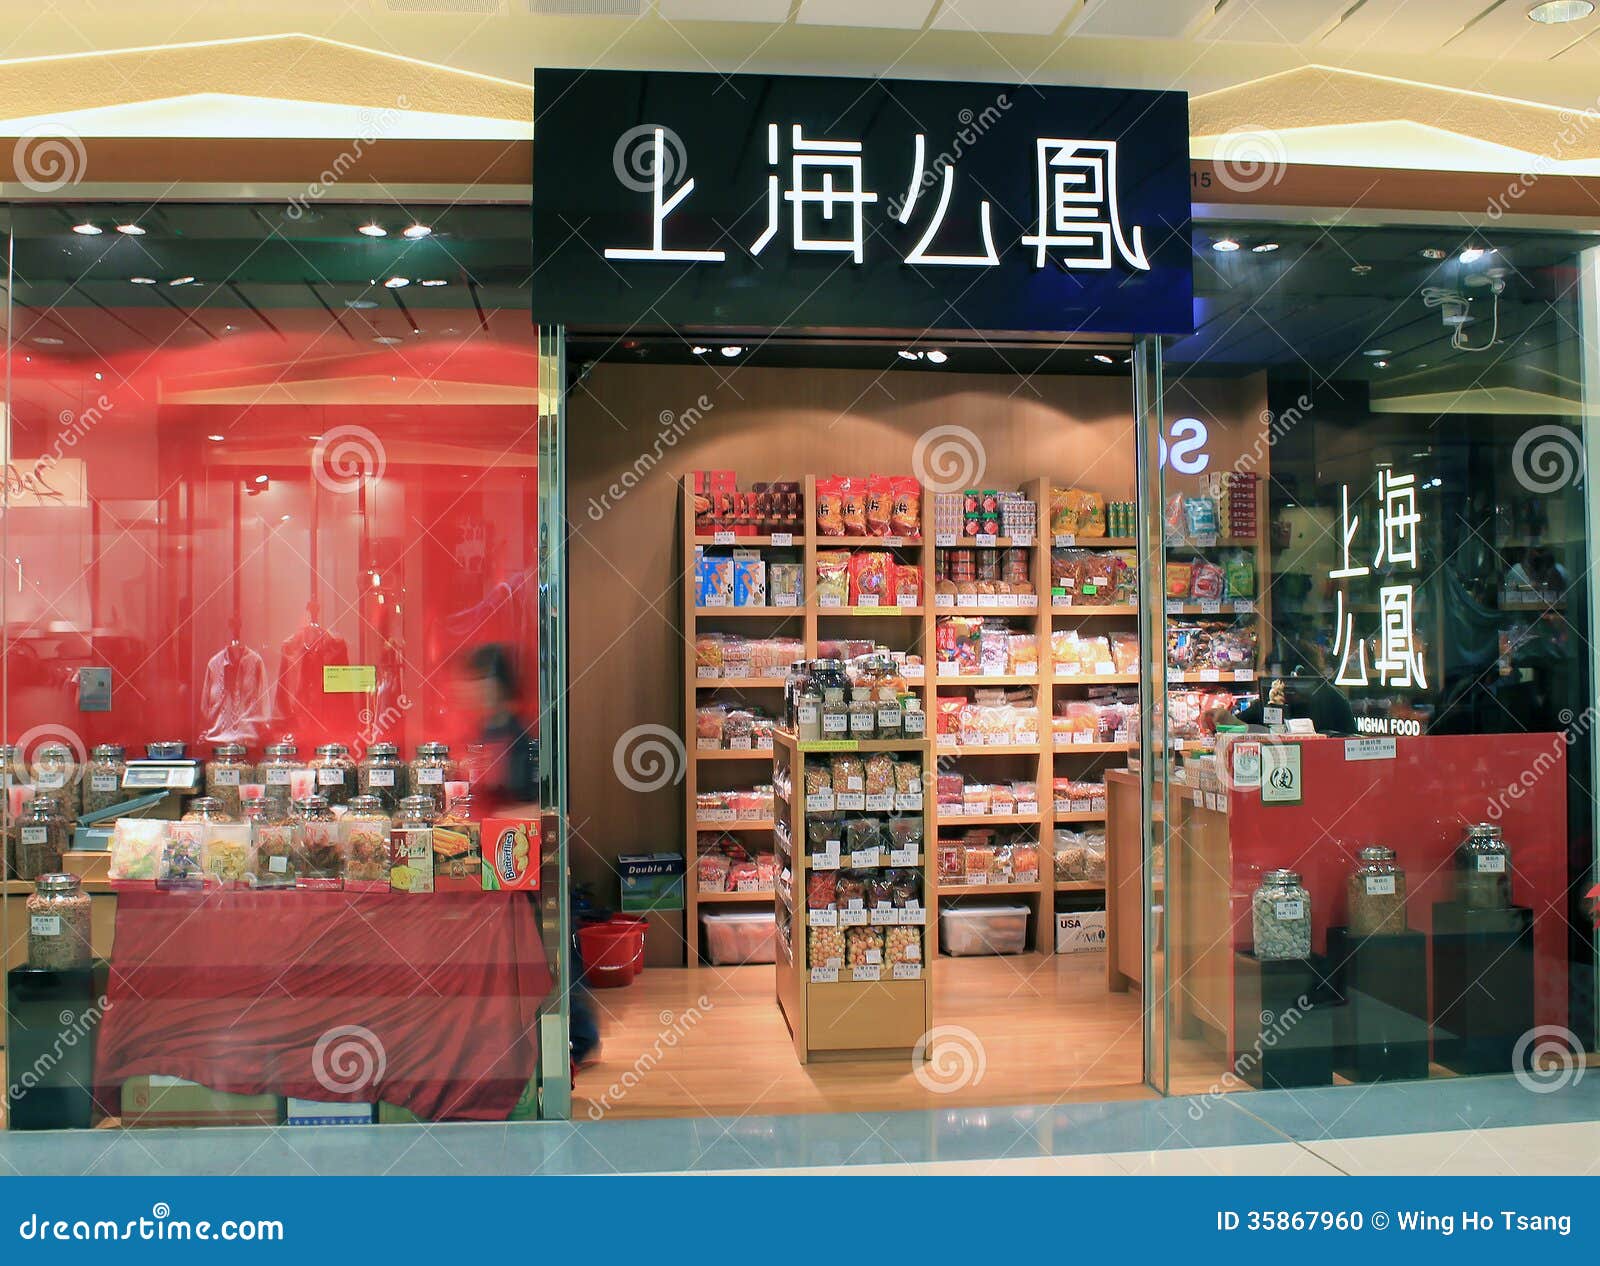 Shanghai Snack Shop In Hong Kong Editorial Image Image Of East Point